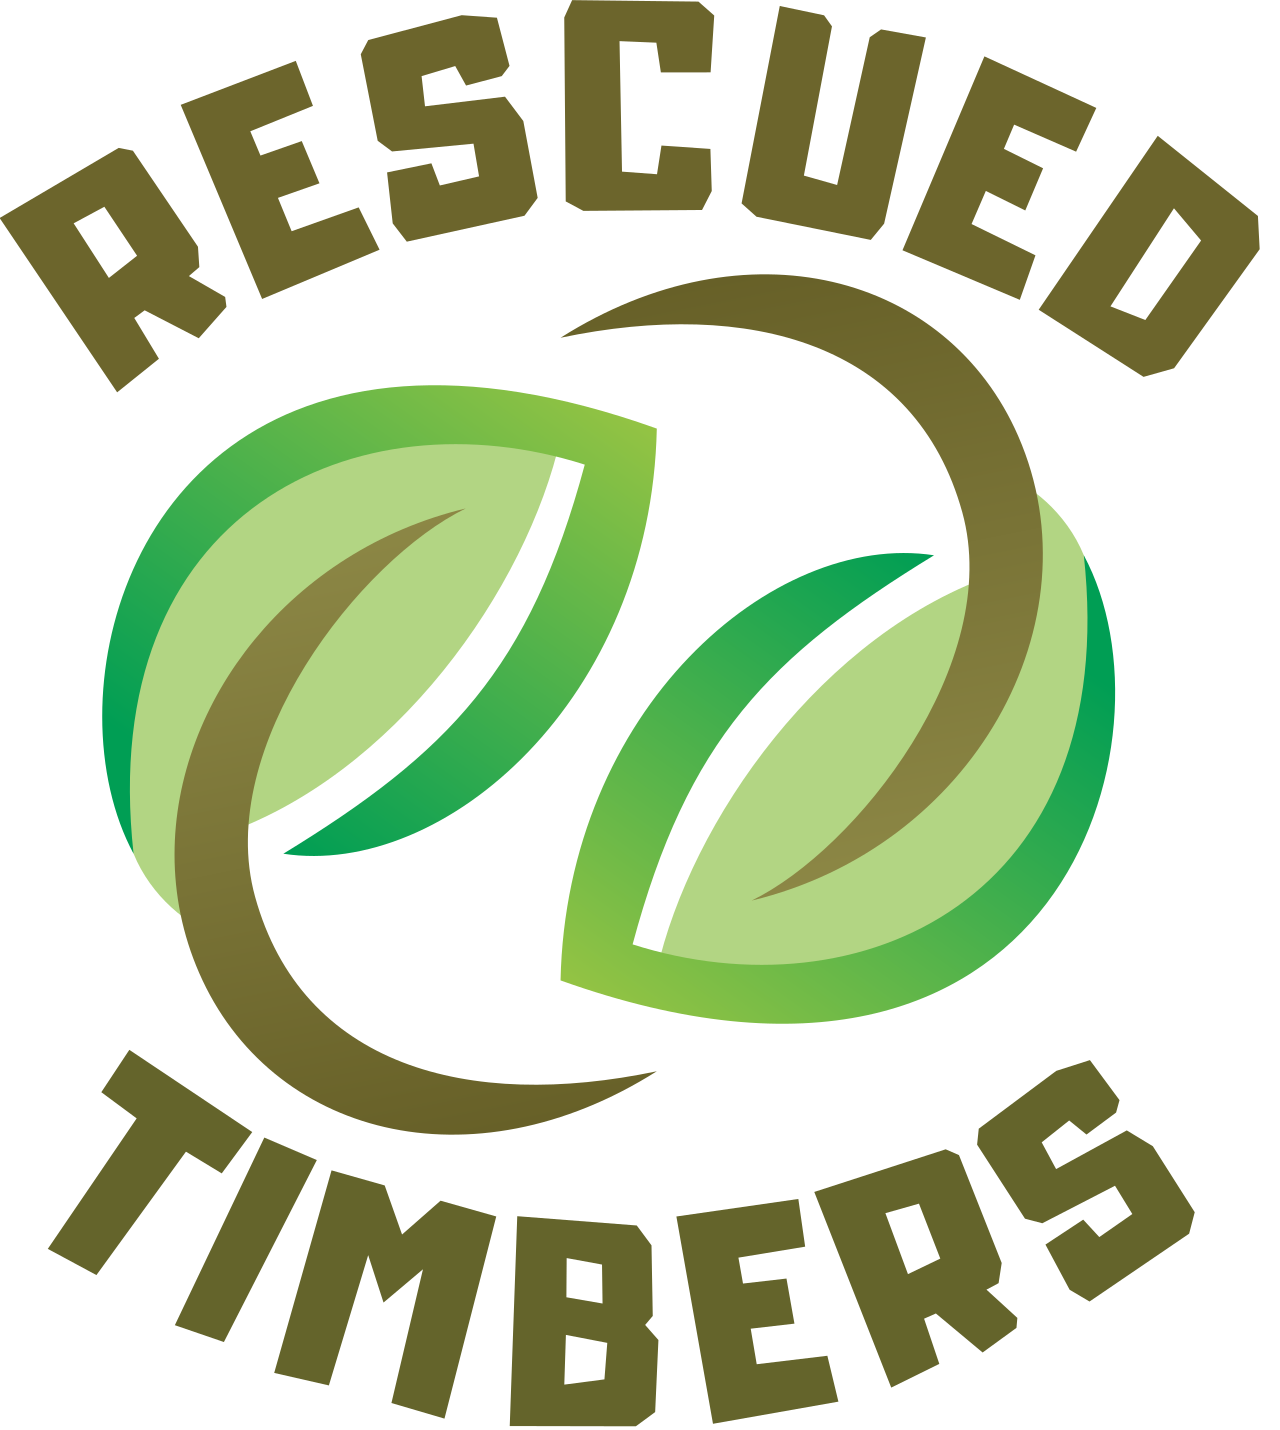 RESCUED's logo